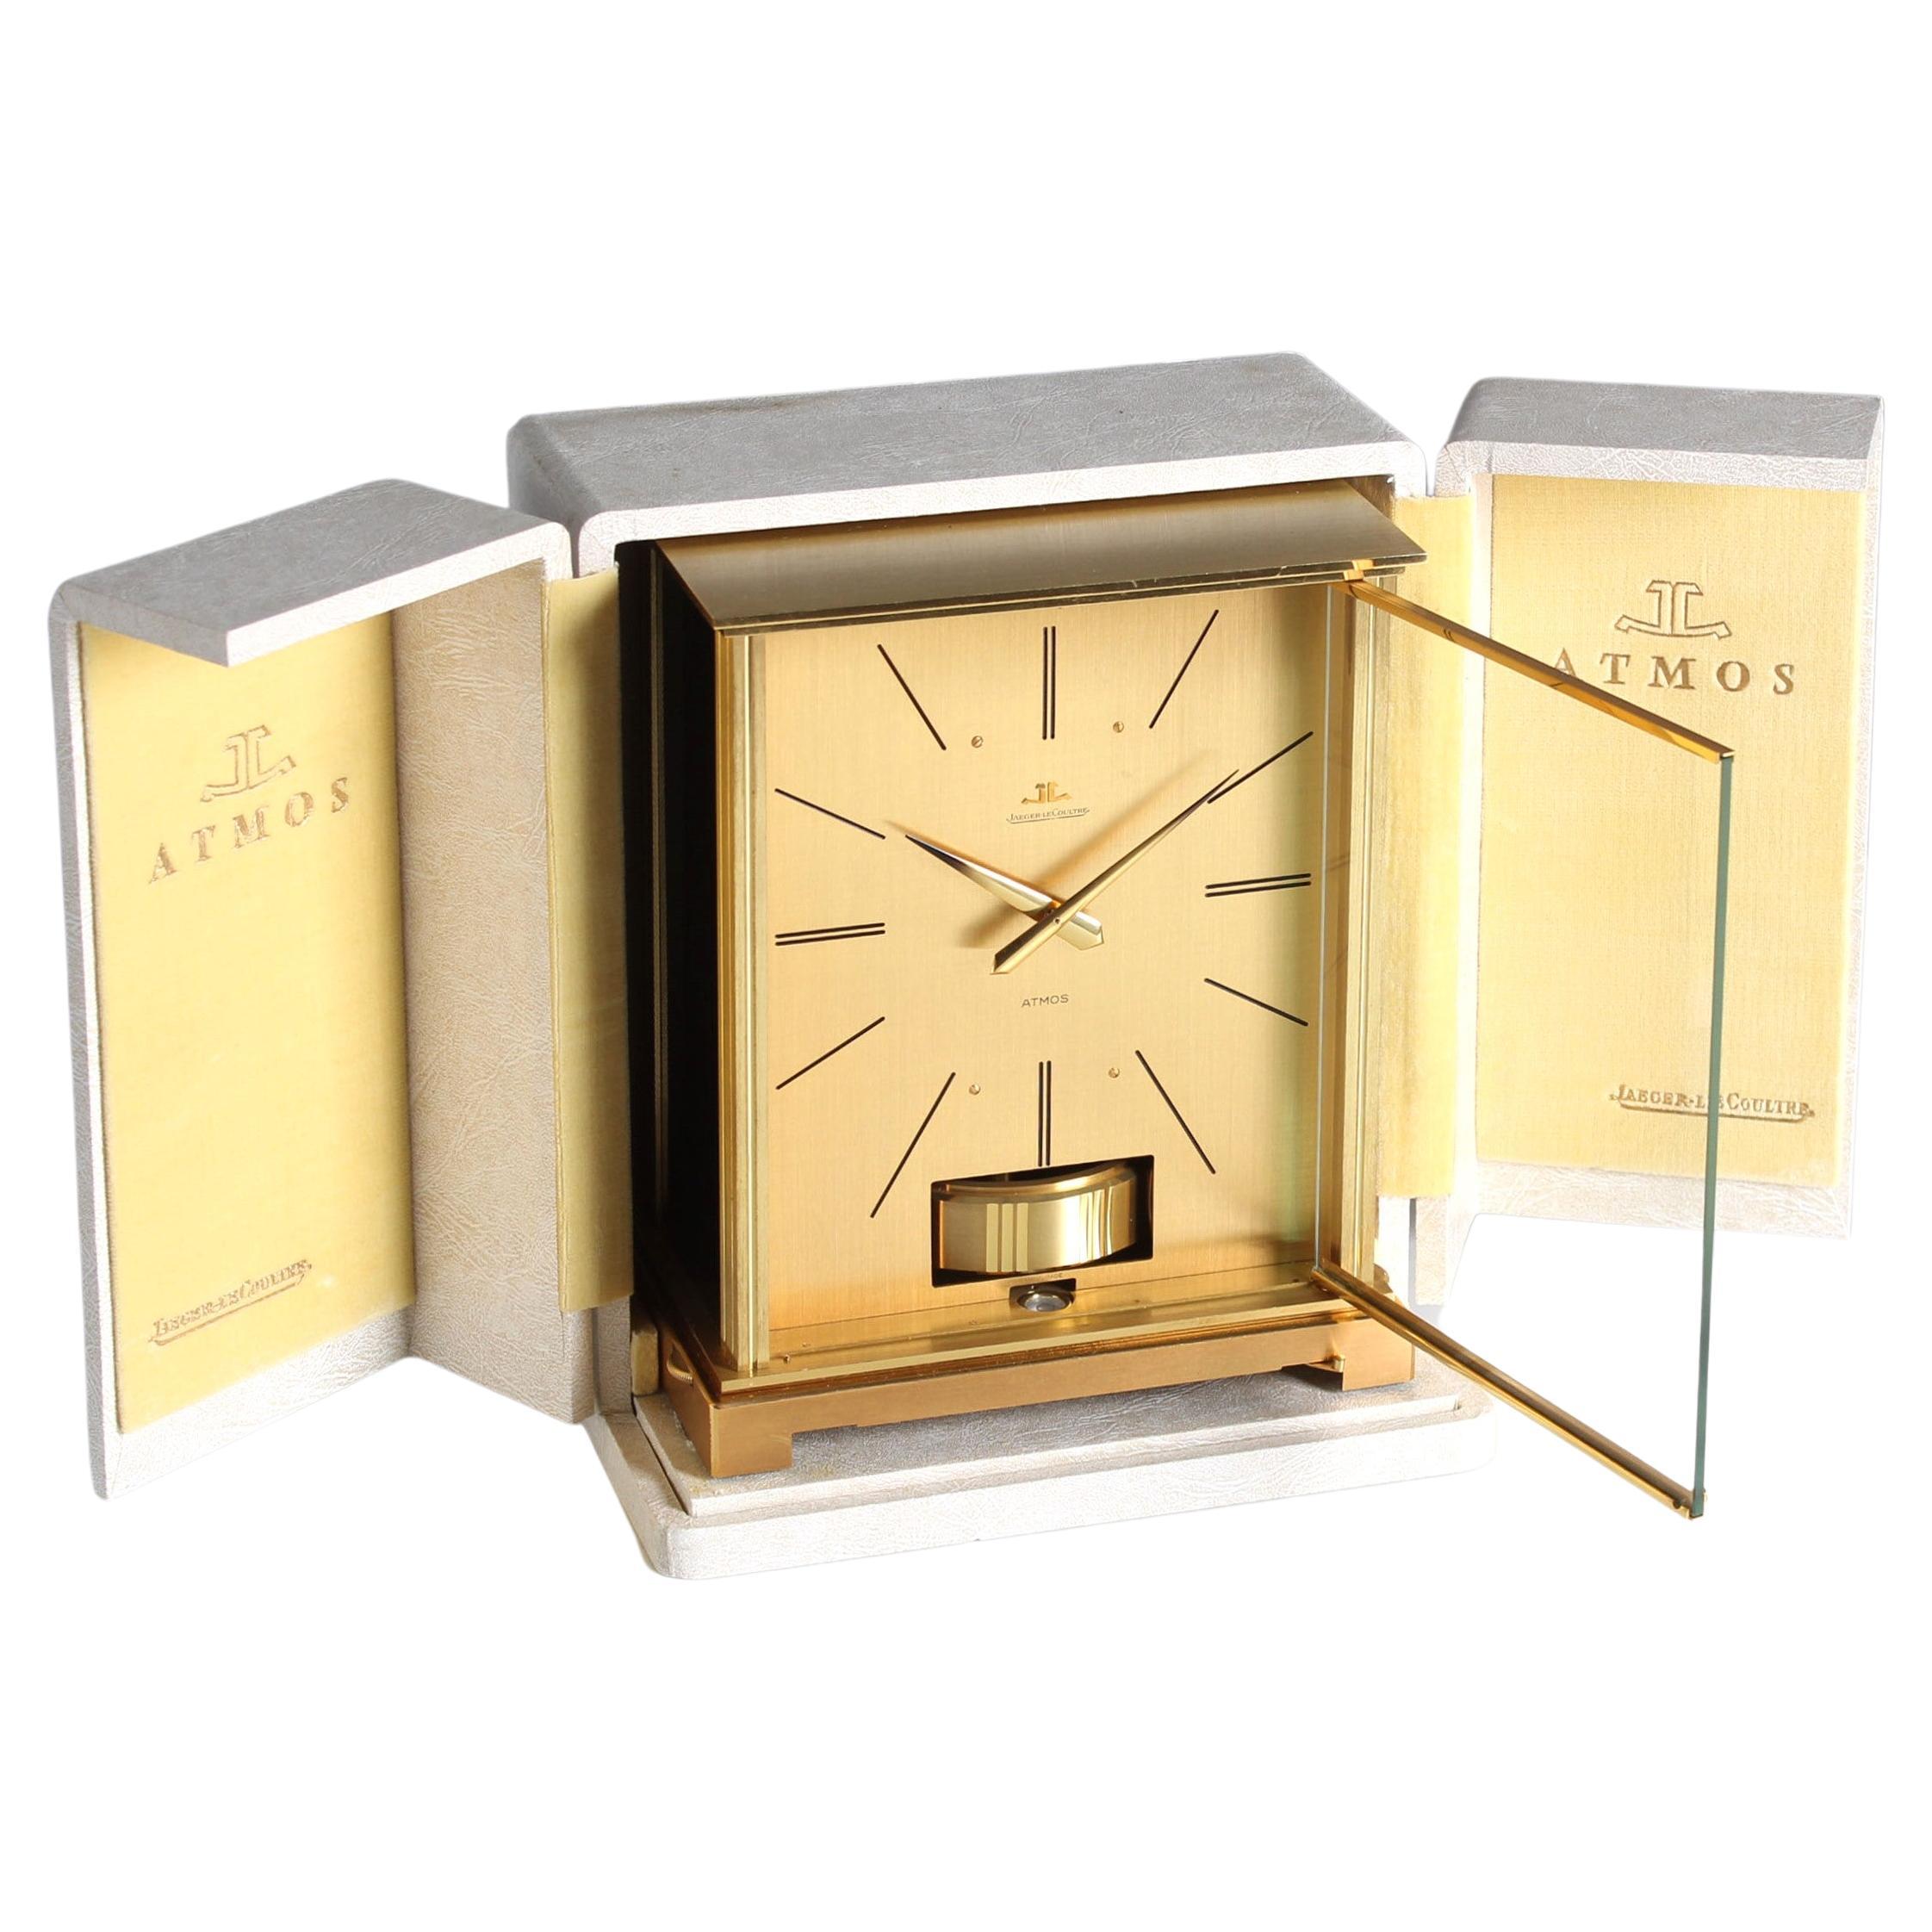 Jaeger Lecoultre, Atmos Clock from 1967 with Original Box For Sale